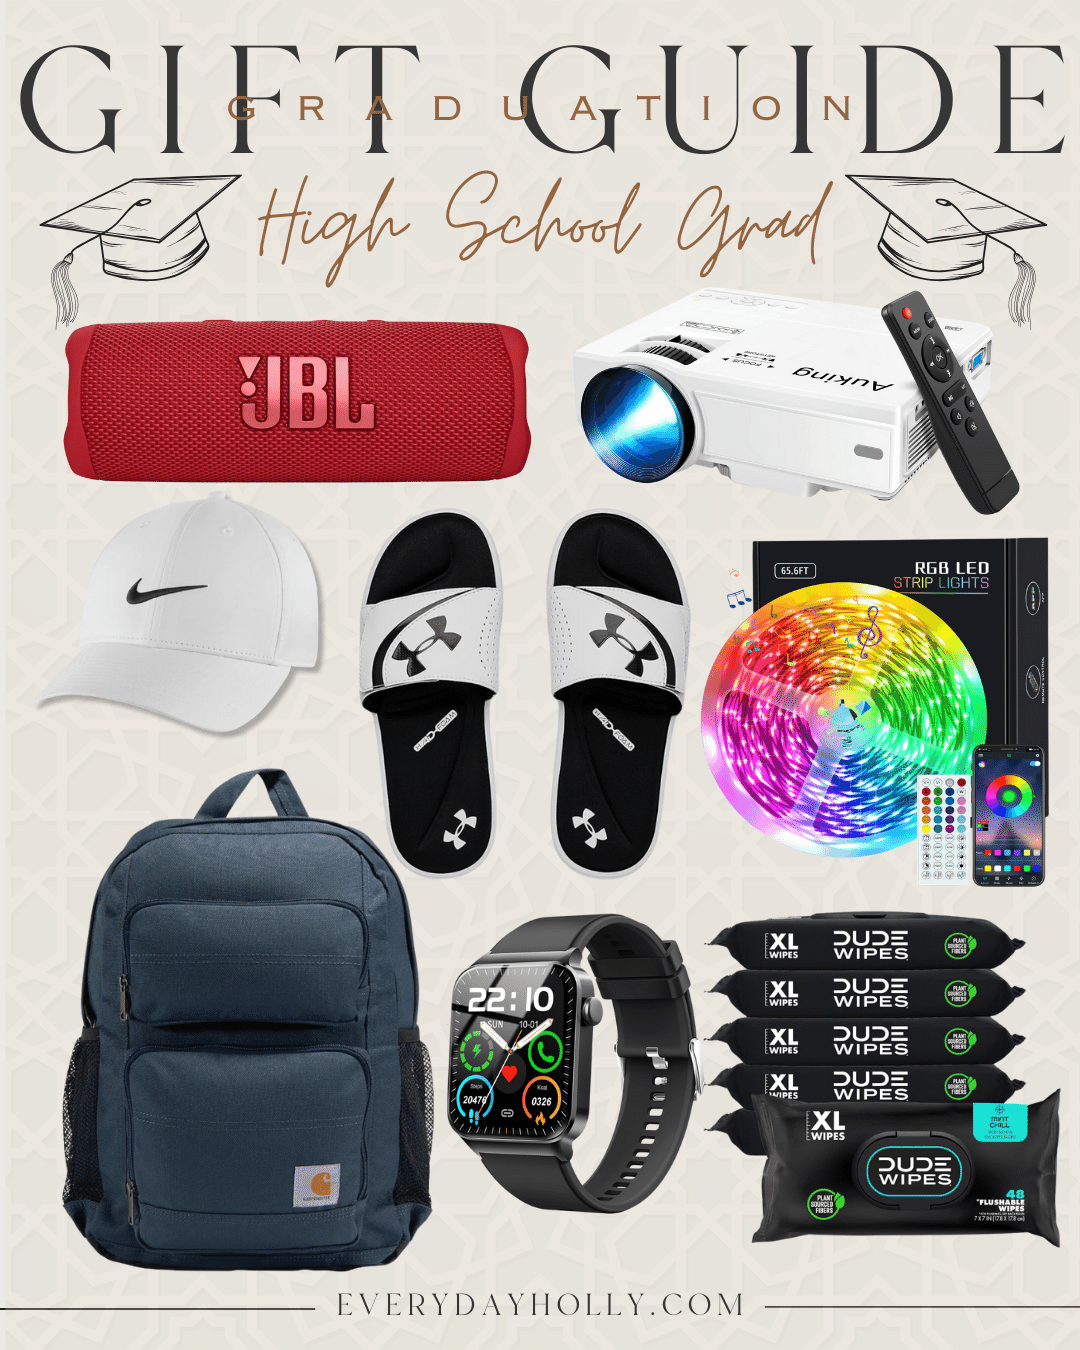 45 gift ideas for the graduate in your life | gift guide, gift ideas, graduation gift, graduate, high school grad, college grad, speaker, room decor, LED light strip, slides, backpack, Carhartt, Nike, smart watch, gifts for him, gifts for teen boy